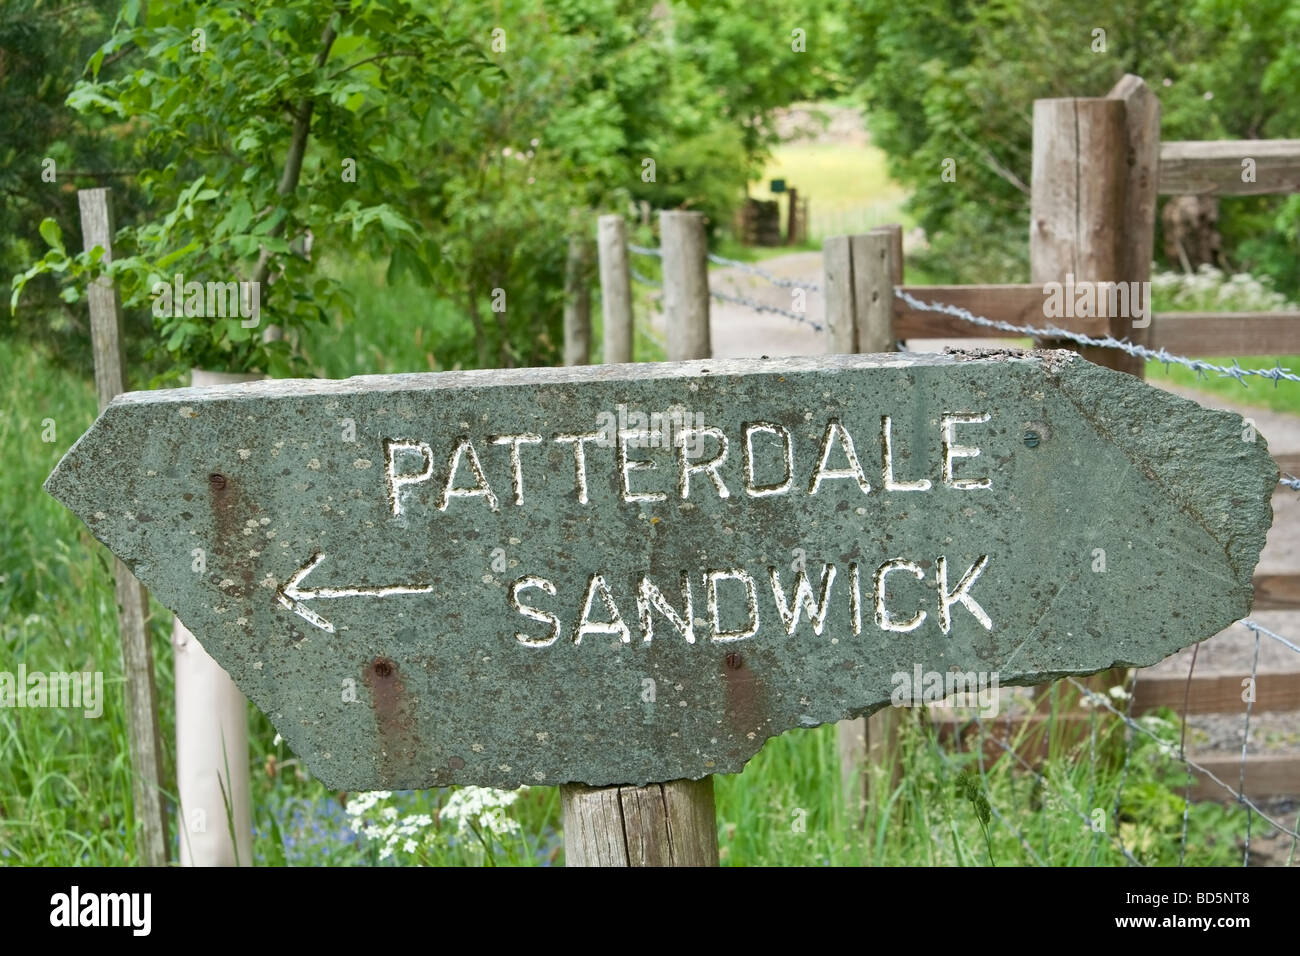 A slate sign to Patterdale and Sandwick, the Lake District, Cumbria, UK.. Stock Photo